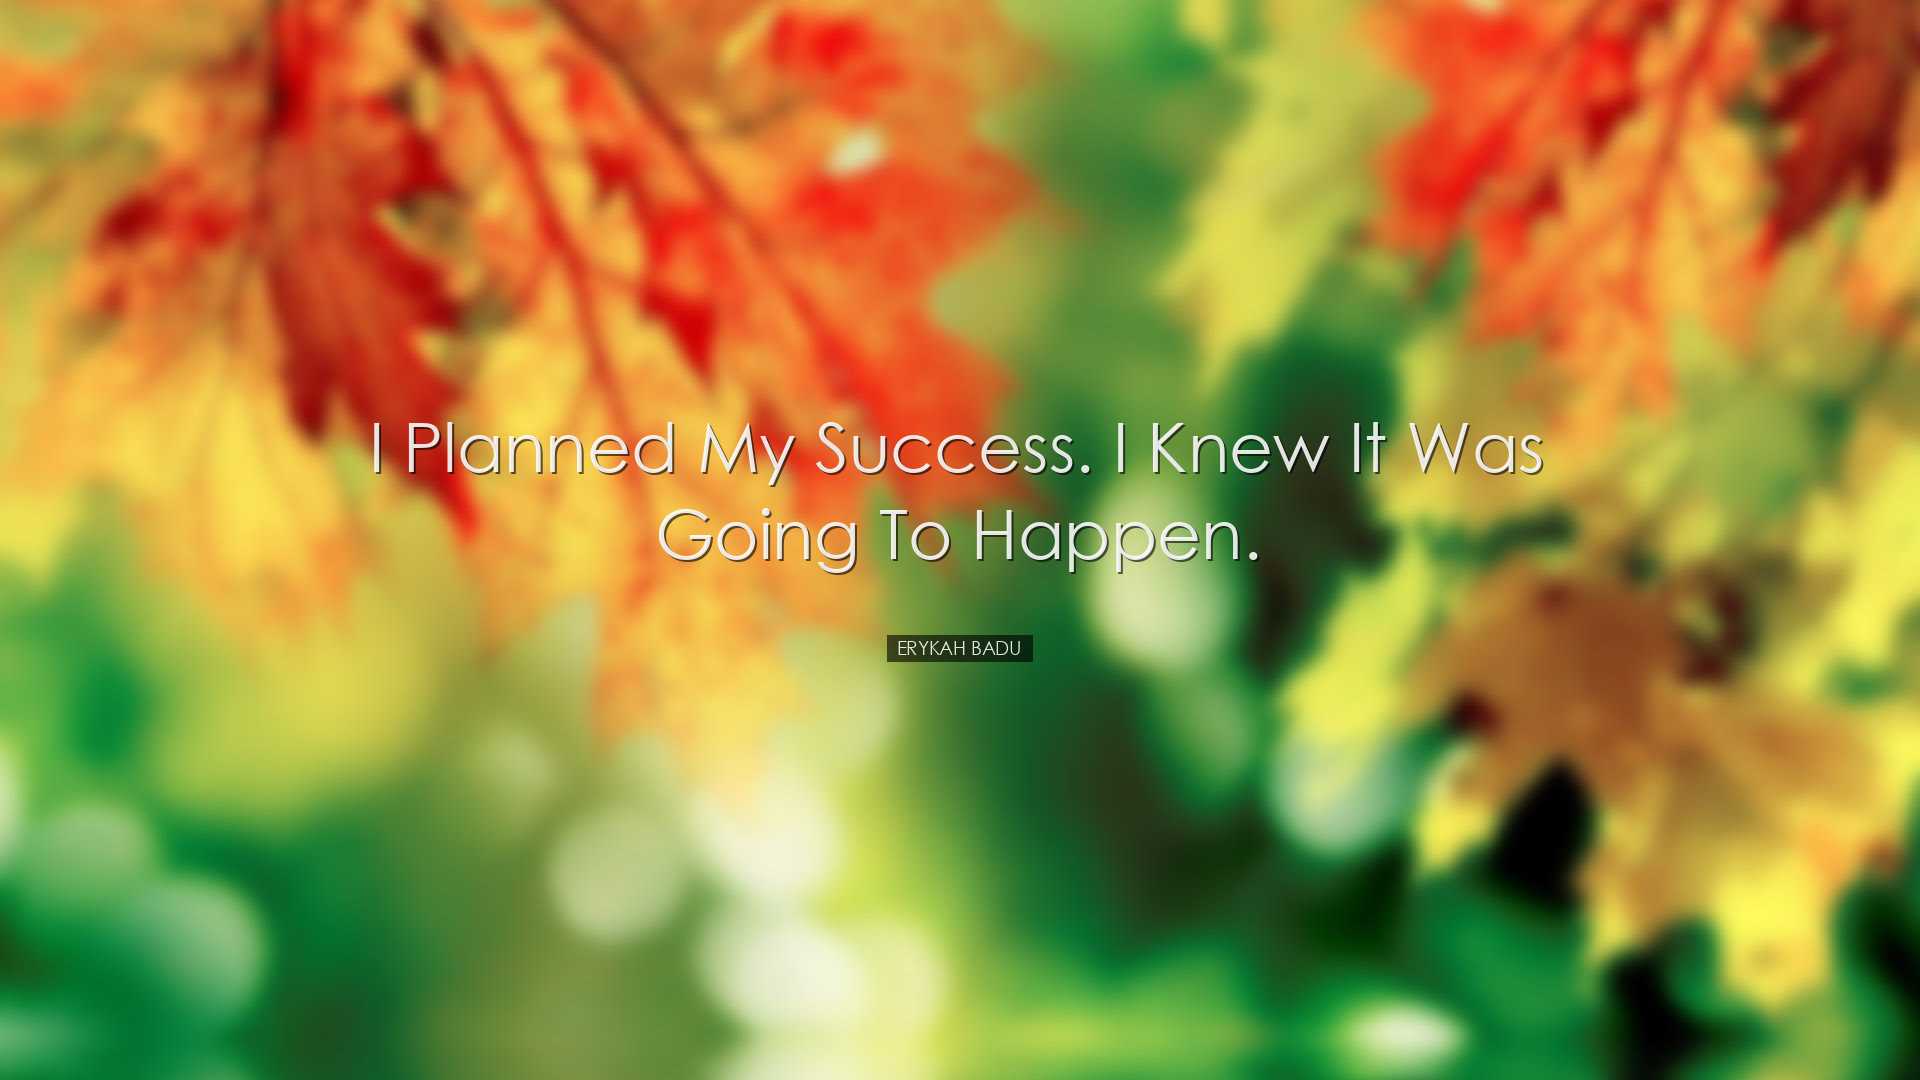 I planned my success. I knew it was going to happen. - Erykah Badu